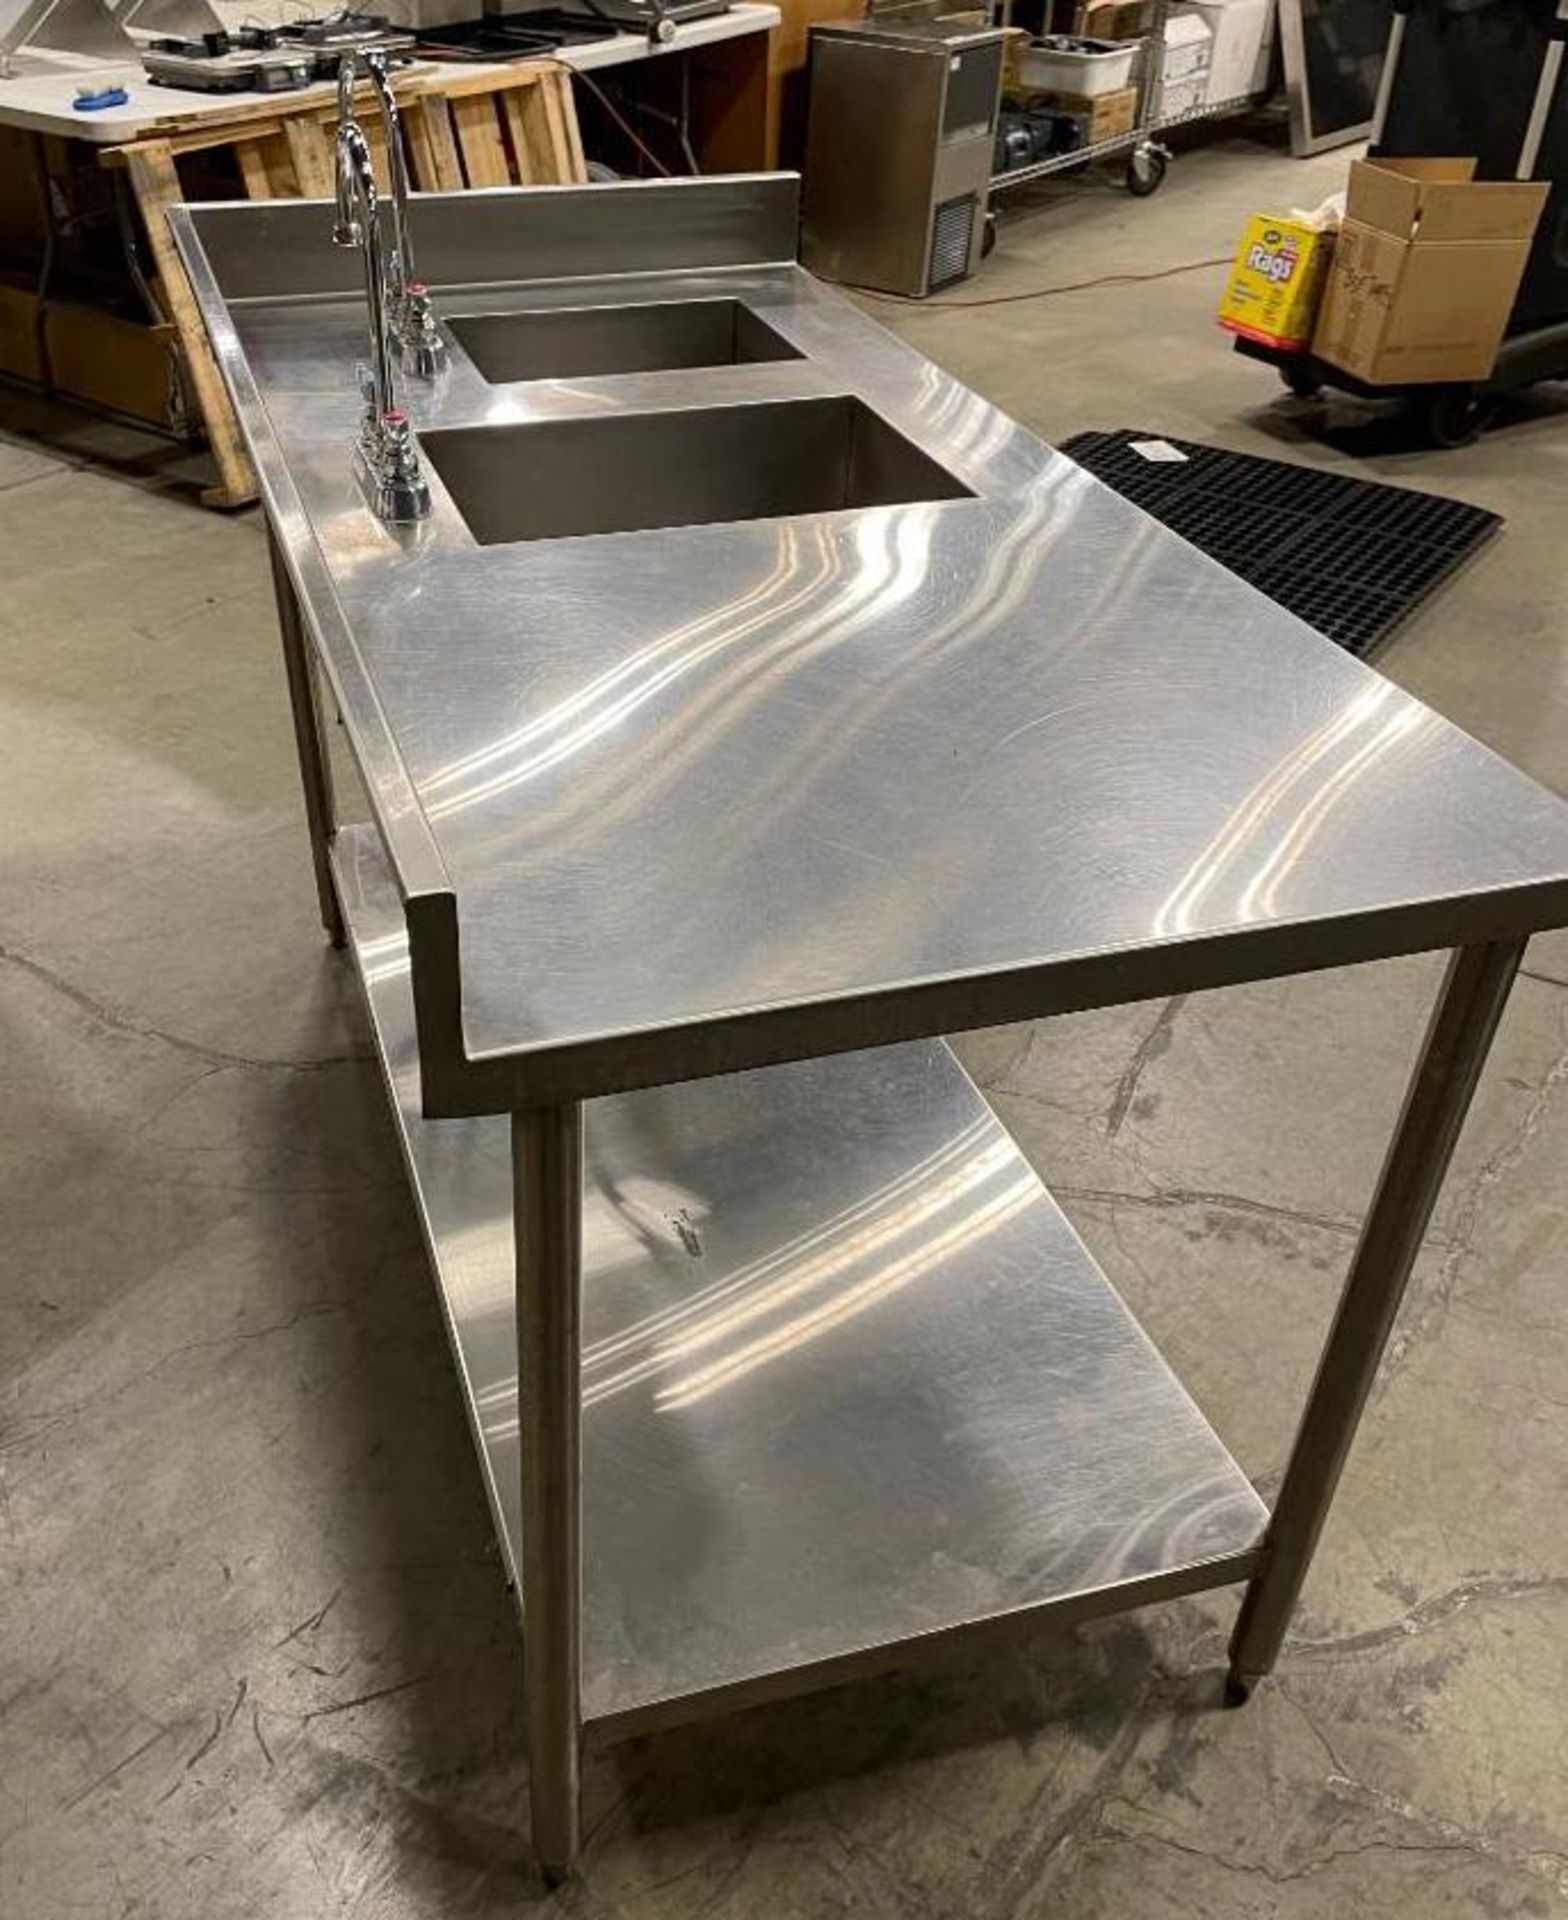 60" STAINLESS STEEL WORK TABLE WITH TWO SINK WELLS & TAPS - Image 5 of 6